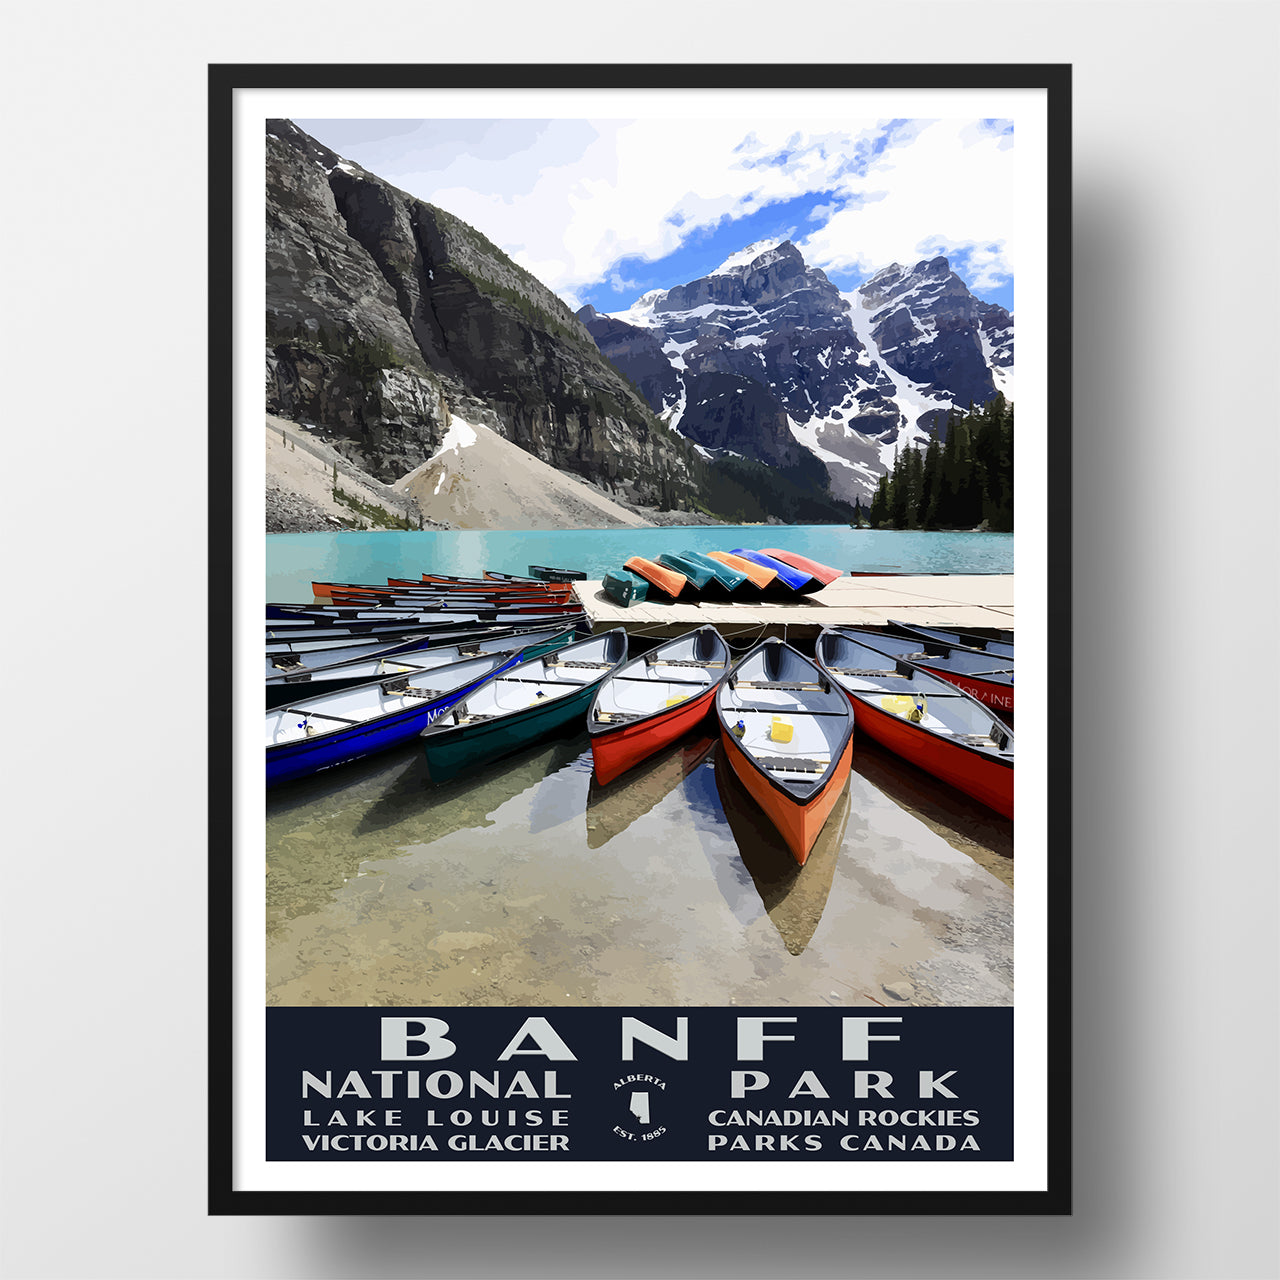 Canoes in the Lake Poster